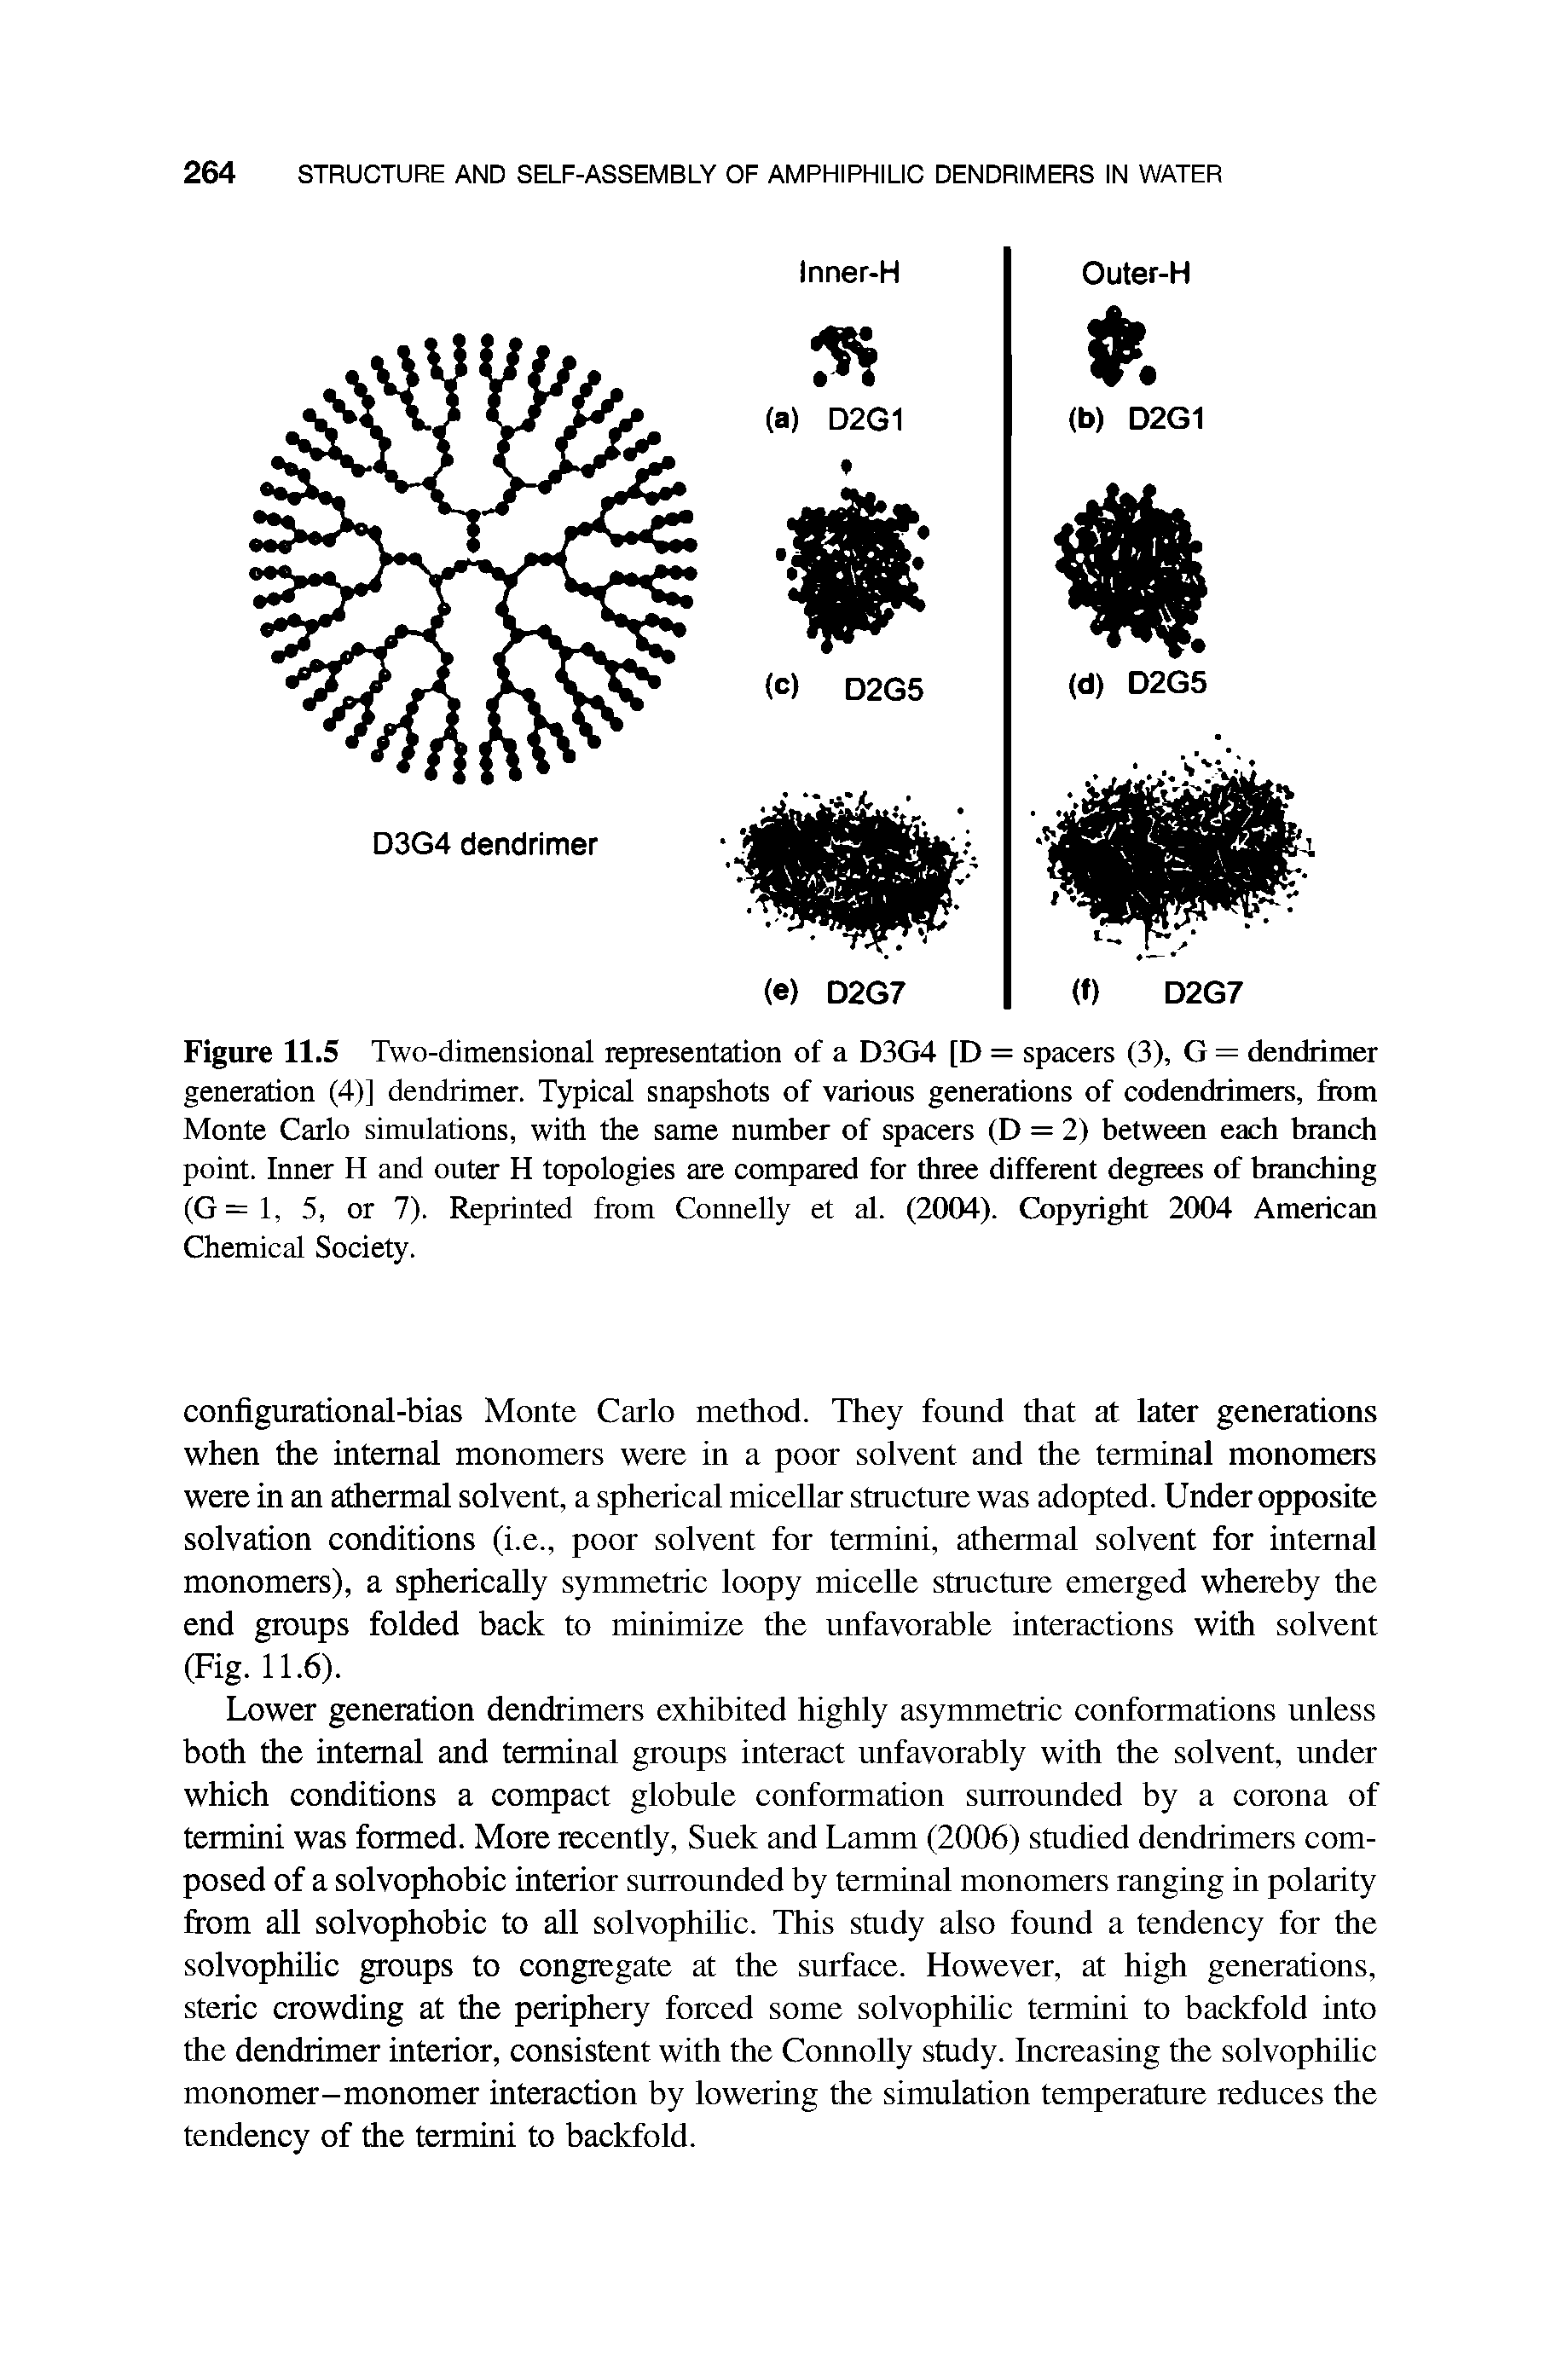 Figure 11.5 Two-dimensional representation of a D3G4 [D = spacers (3), G = dendrimer generation (4)] dendrimer. Typical snapshots of various generations of codendrimers, from Monte Carlo simulations, with the same number of spacers (D = 2) between each branch point. Inner H and outer H topologies are compared for three different degrees of branching (G=l, 5, or 7). Reprinted from Connelly et al. (2004). Copyright 2004 American Chemical Society.